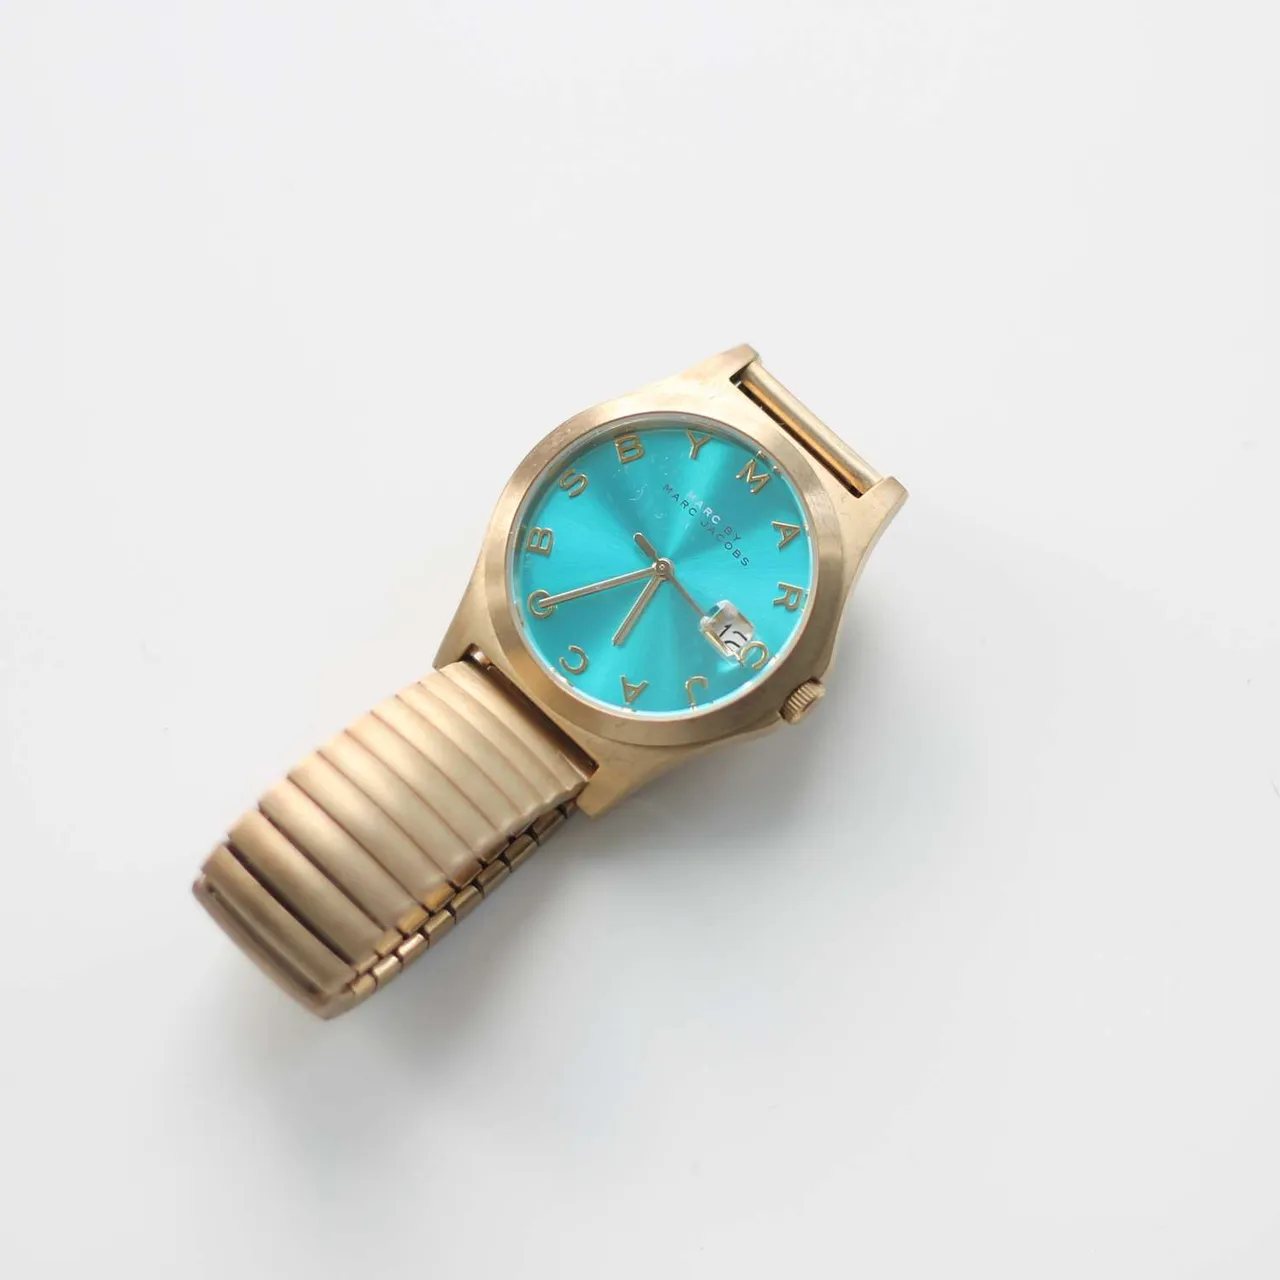 Marc by Marc Jacobs Gold Watch with a Teal Face photo 1